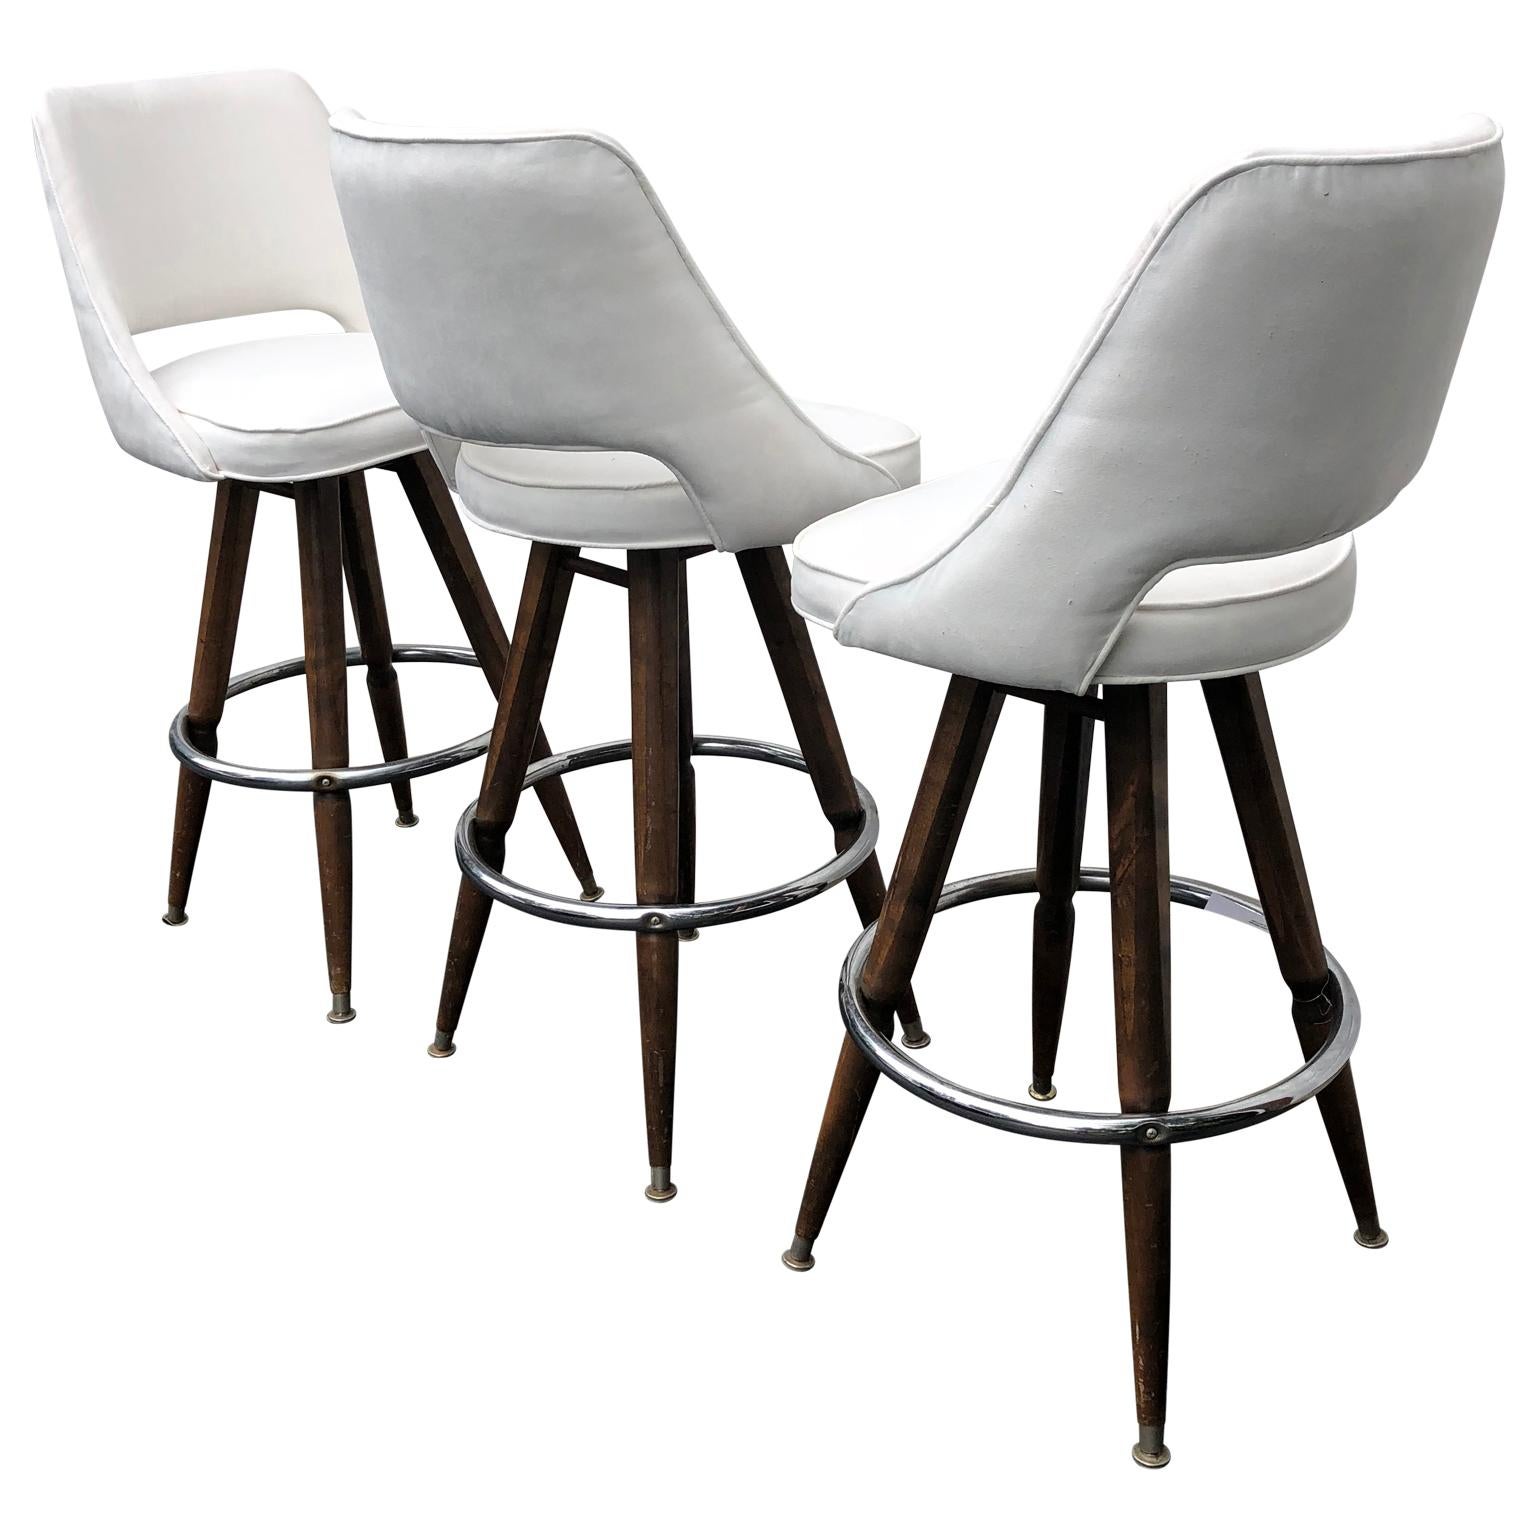 American Set Of Three Mid-Century White Faux-Suede Bar Stools